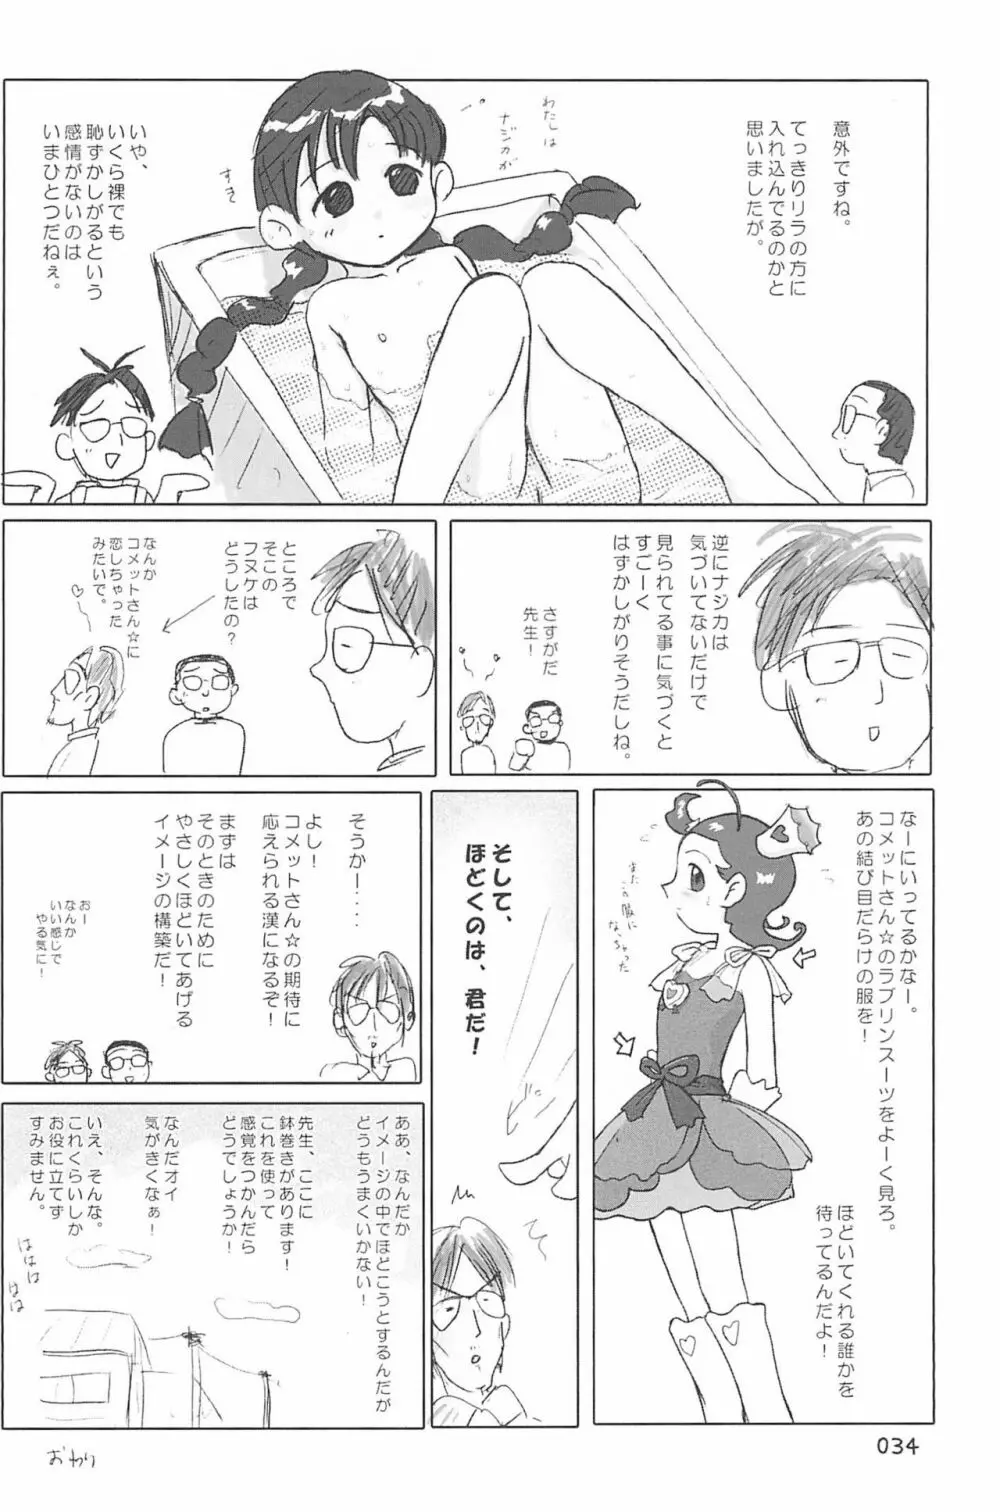 ND-special Volume 4 34ページ